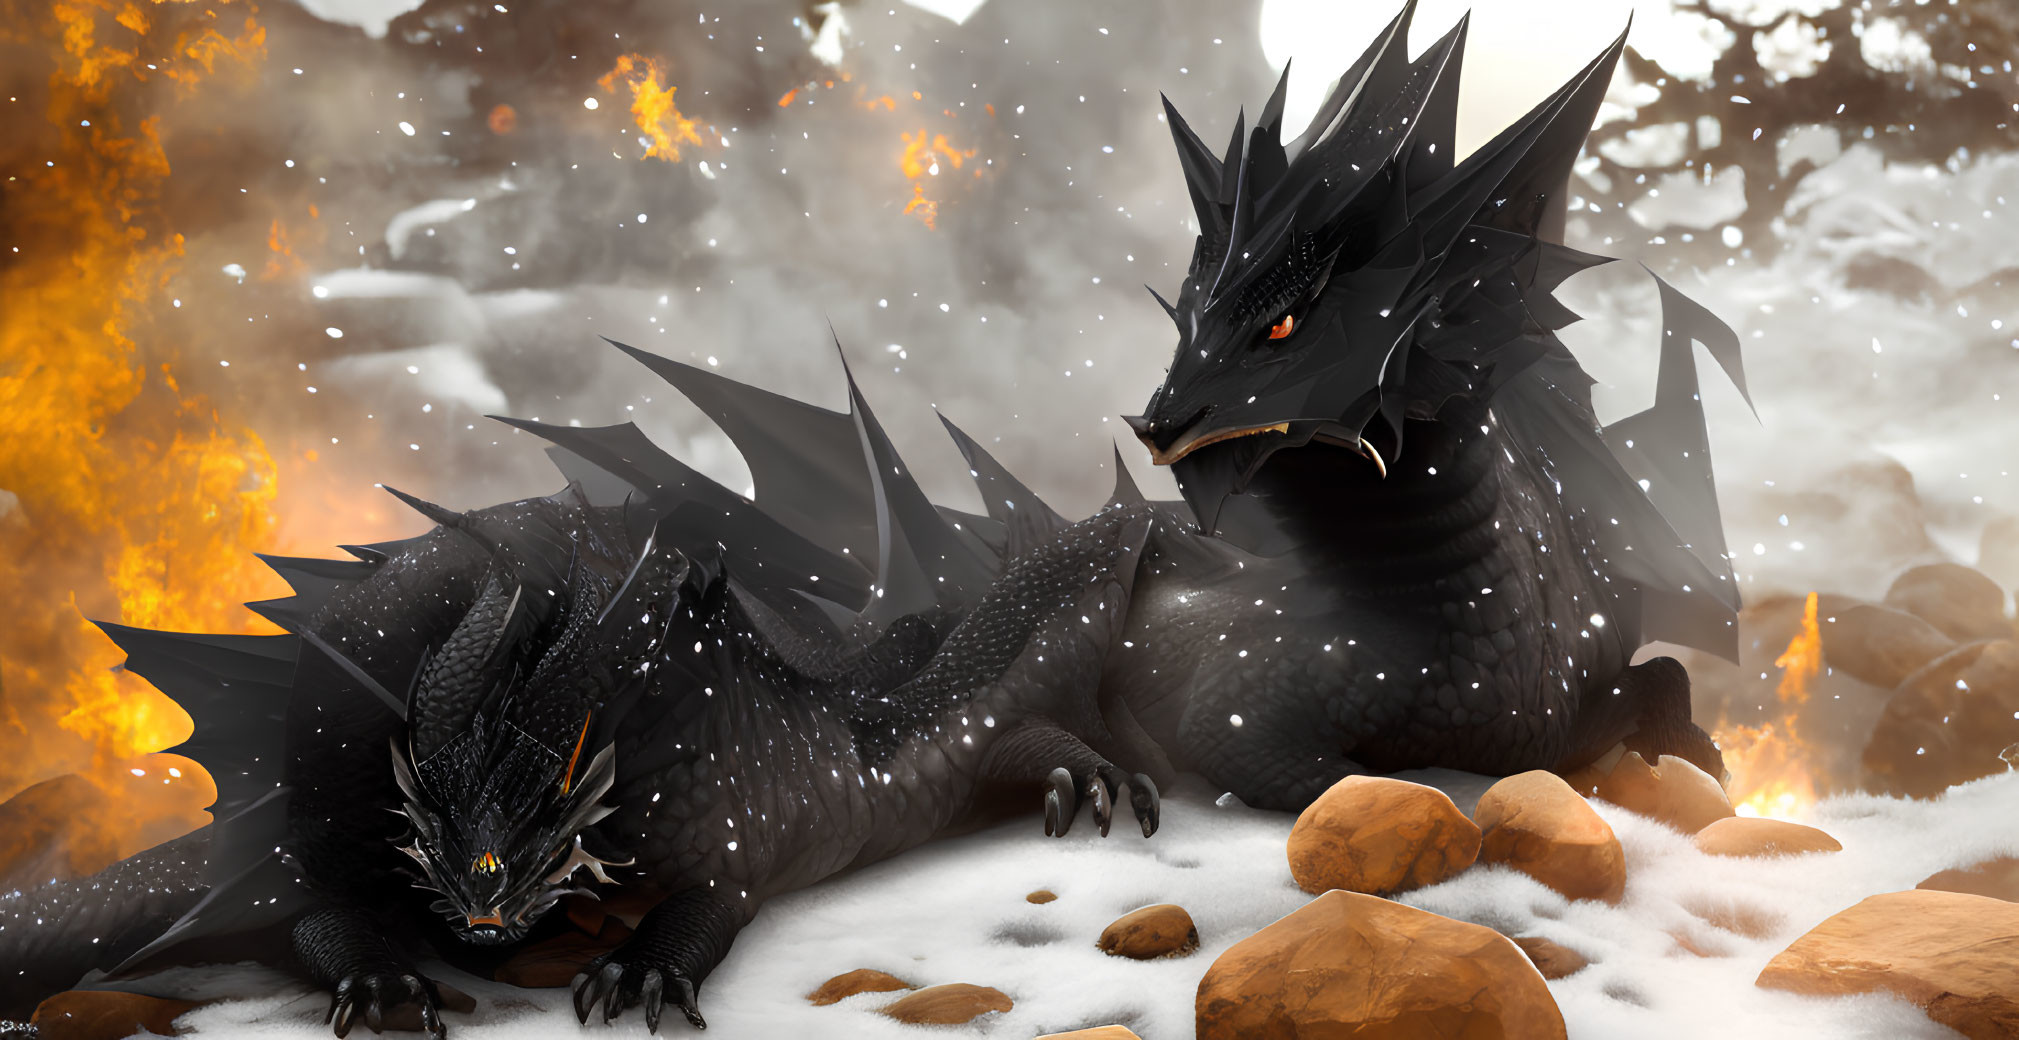 Black dragon with orange eyes amidst rocks and snow in scorched landscape